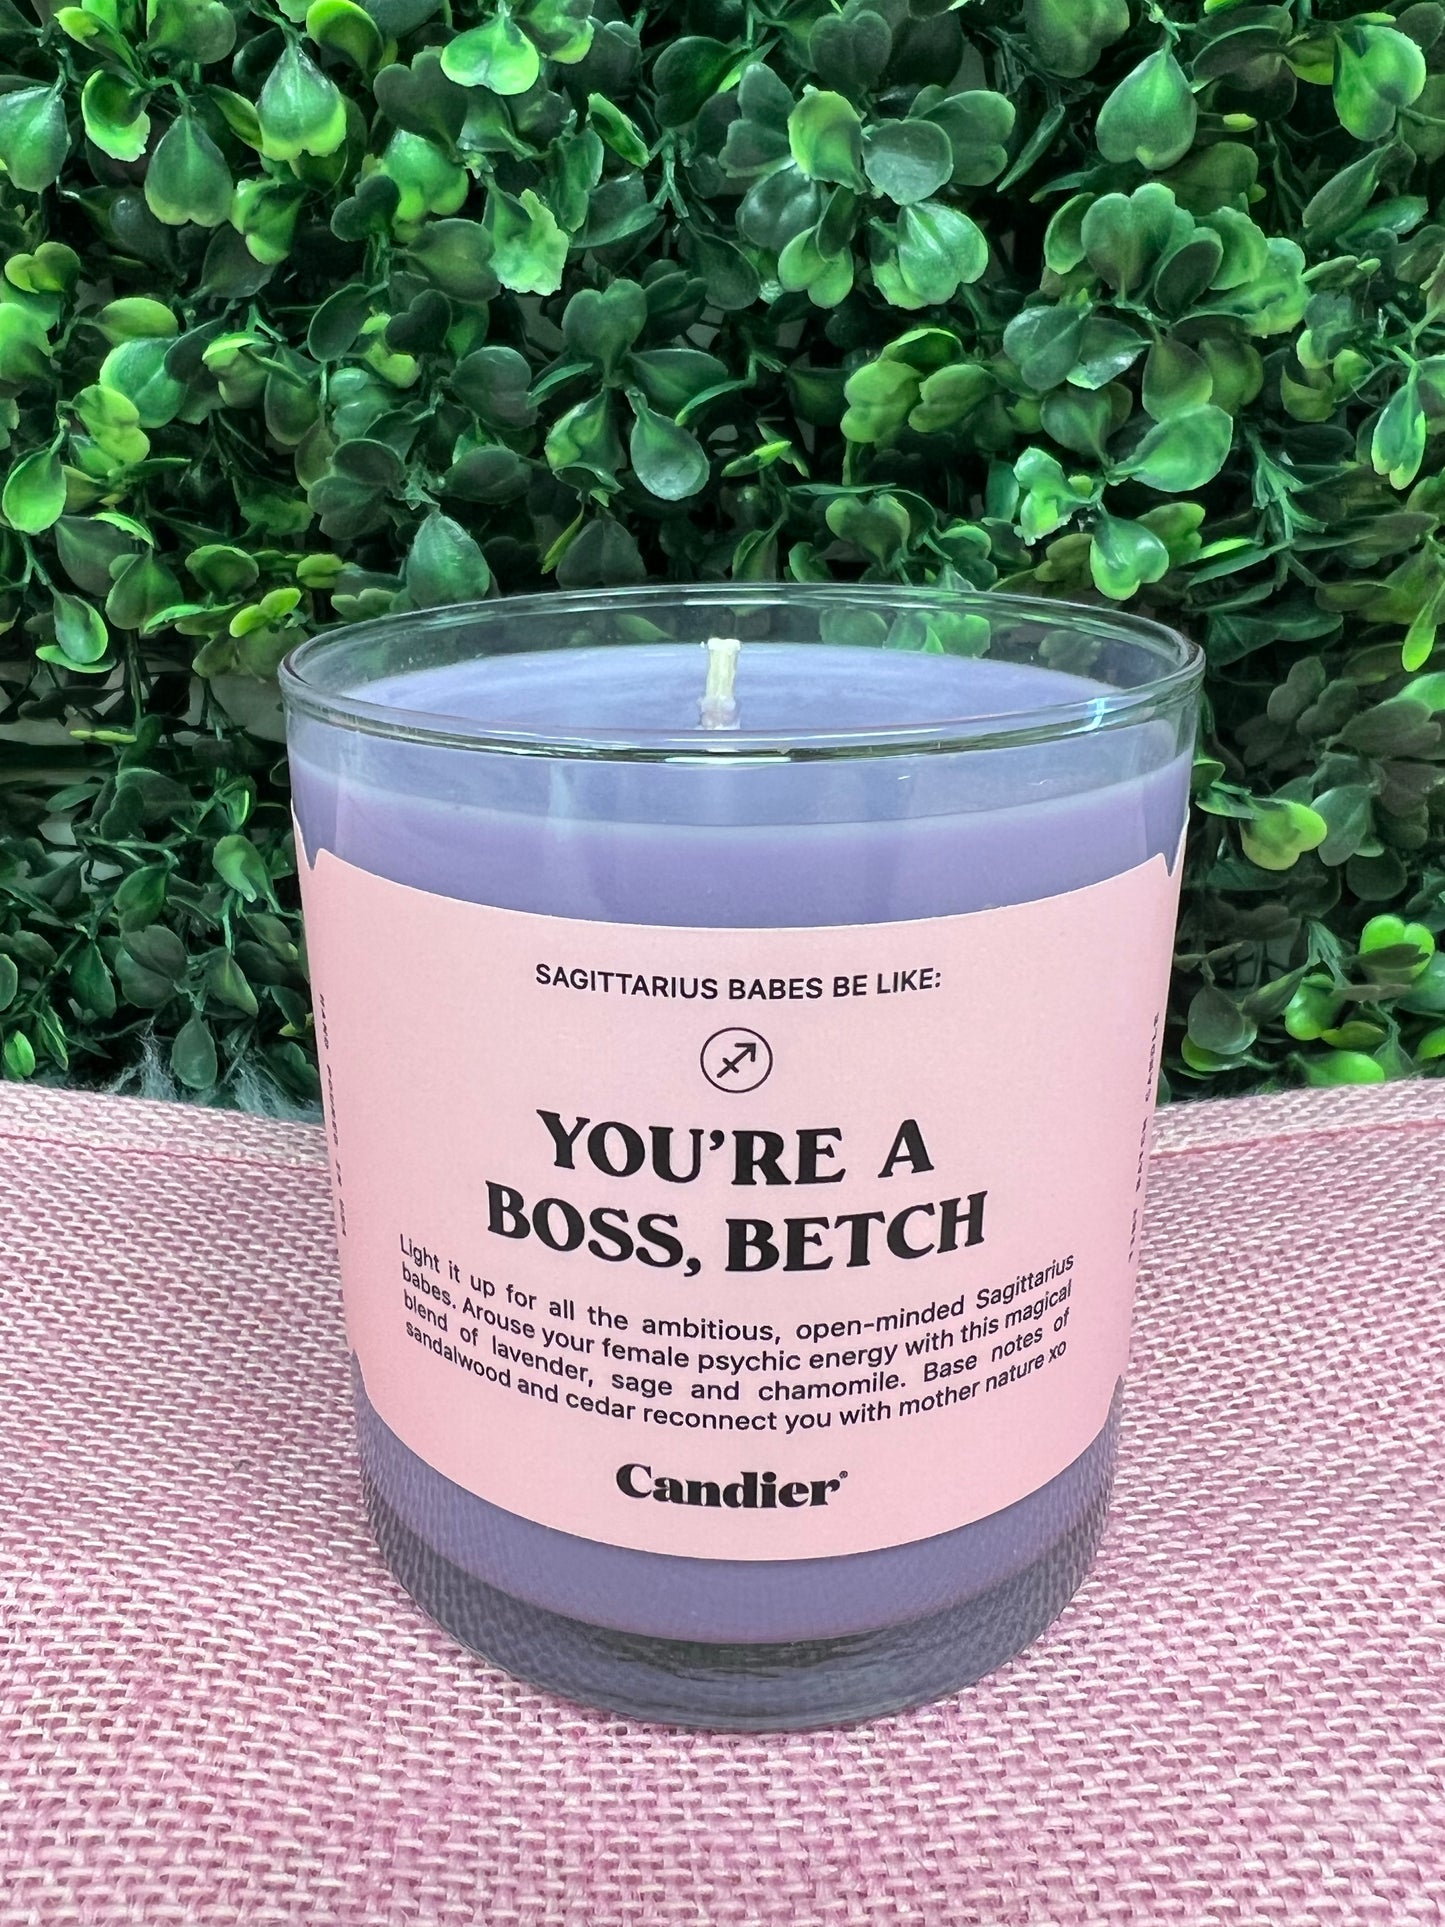 Candles - Ryan Porter Horoscope Sagittarius Babes Be Like: You’re A Boss, Betch Candle